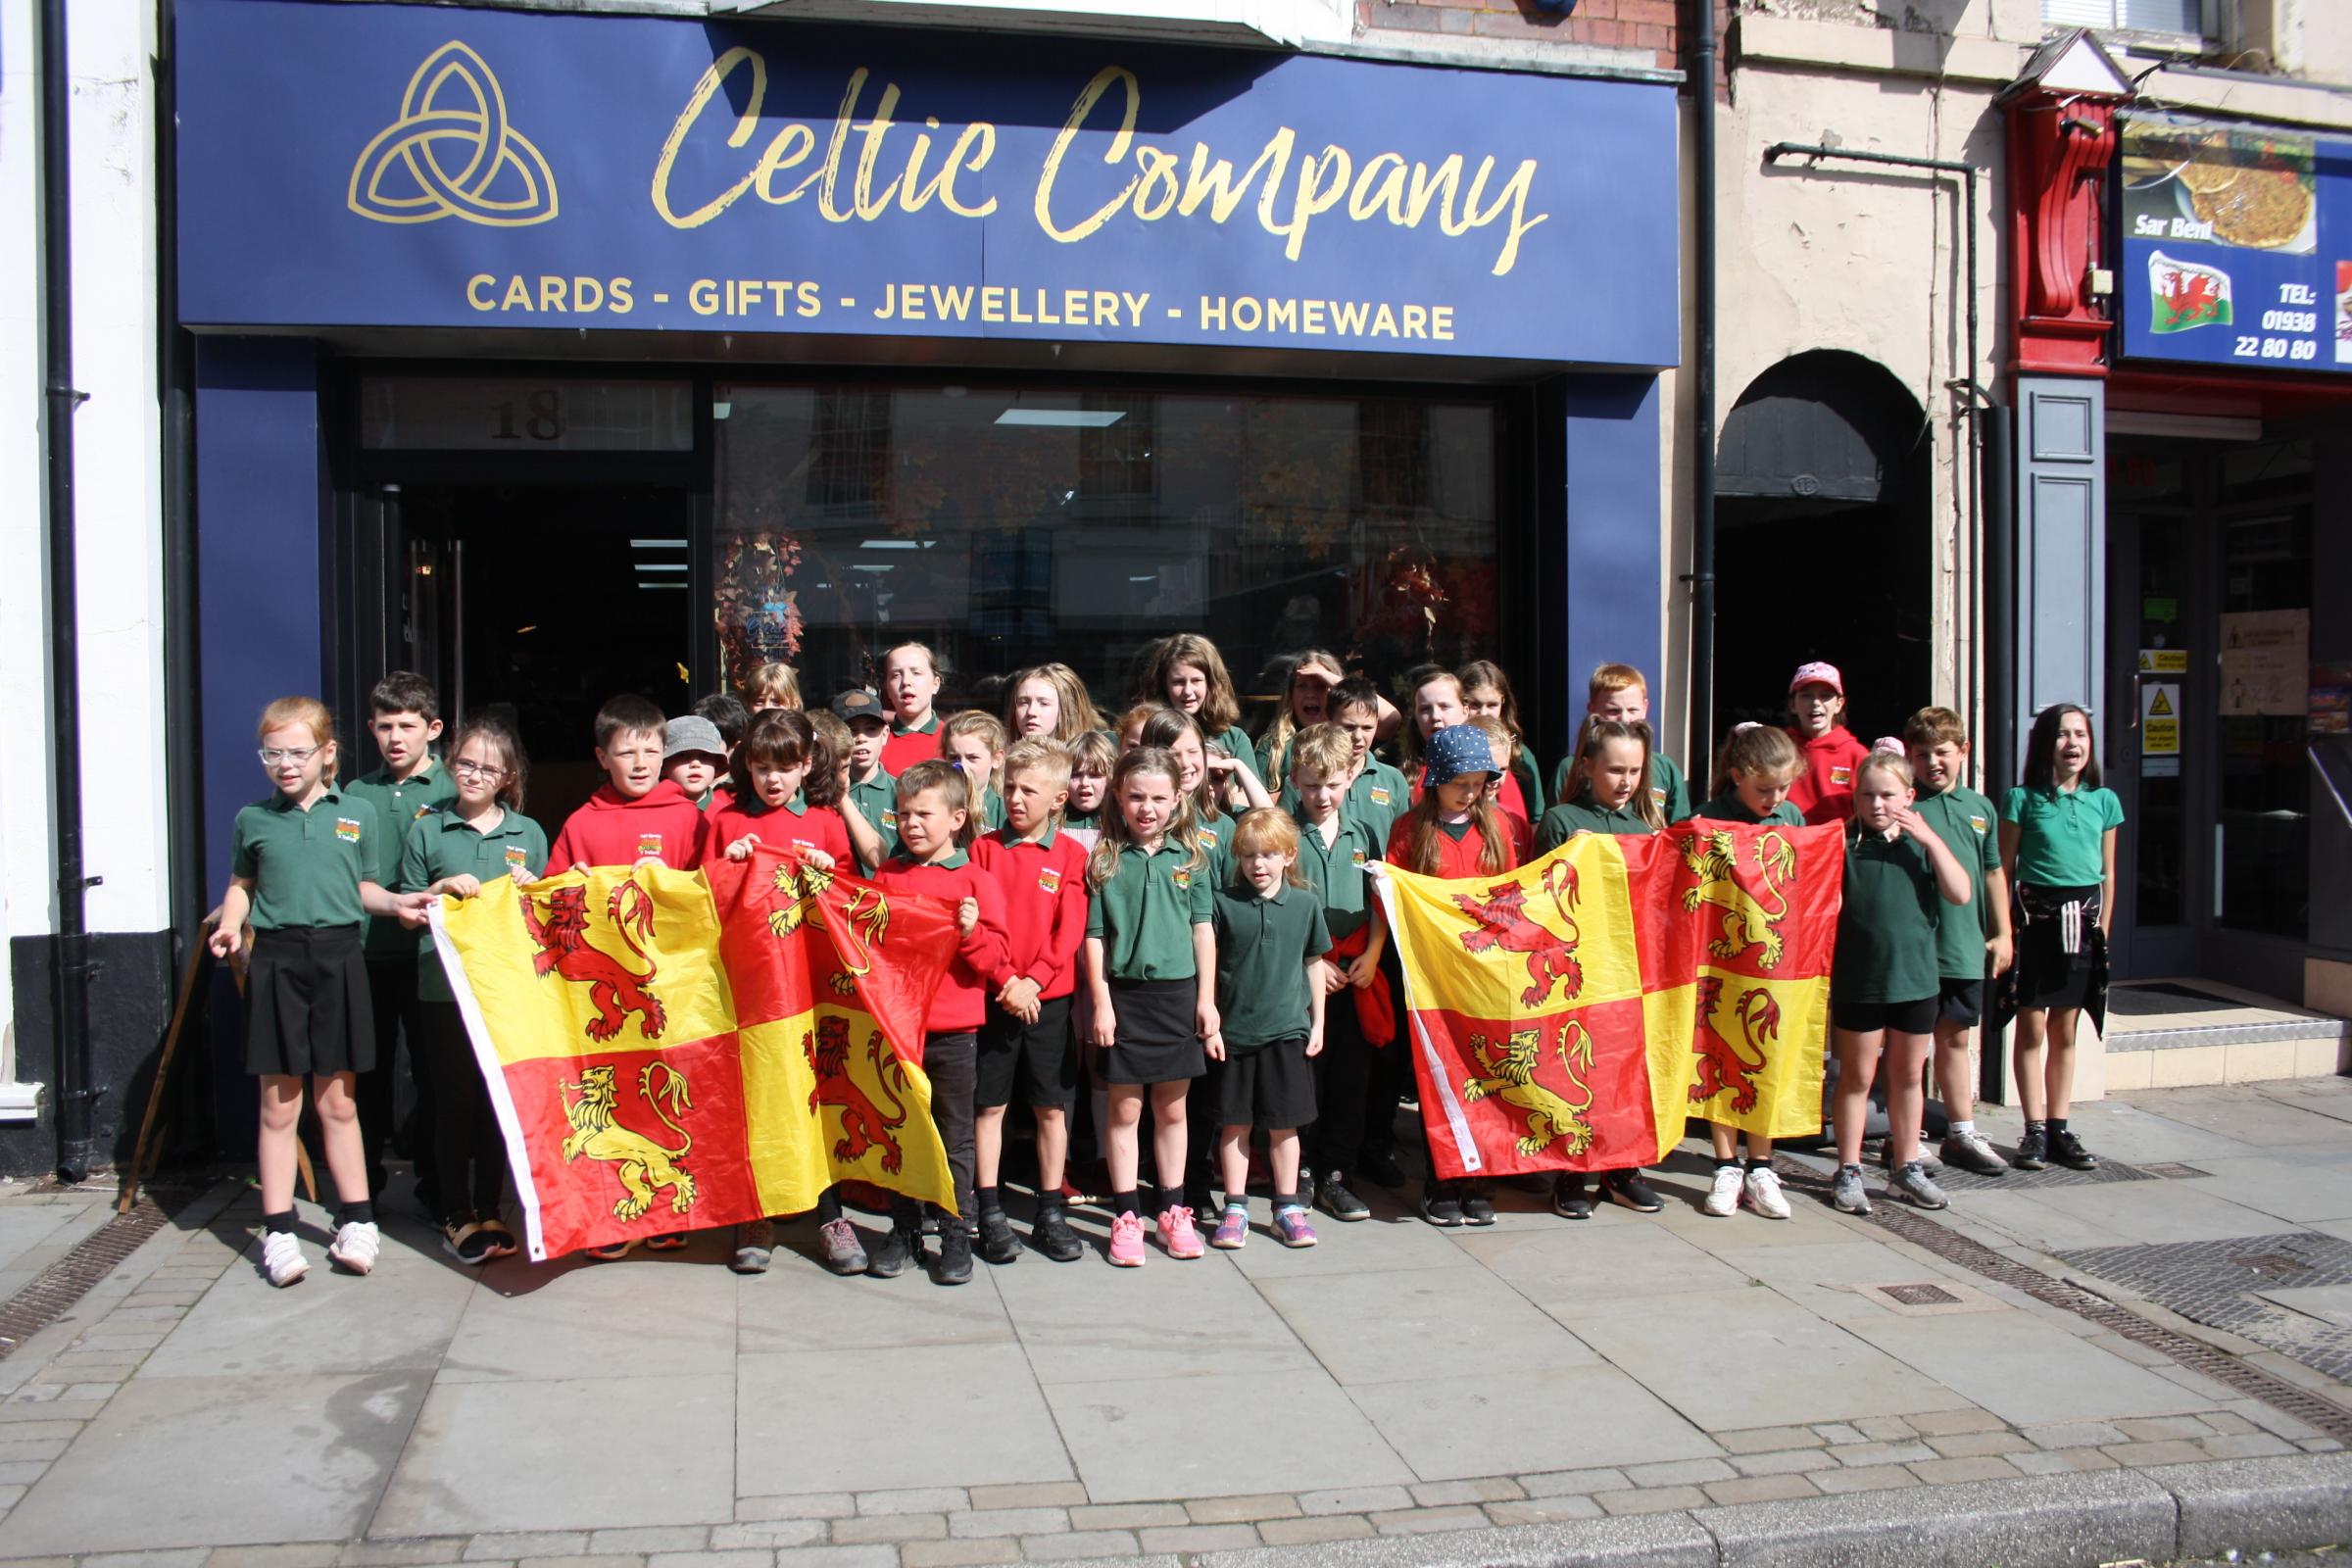 Ysgol Gymraeg Y Trallwng sing in Welshpool town centre to celebrate Owain Glyndwr Day on September 16, 2021. Picture by Anwen Parry/County Times